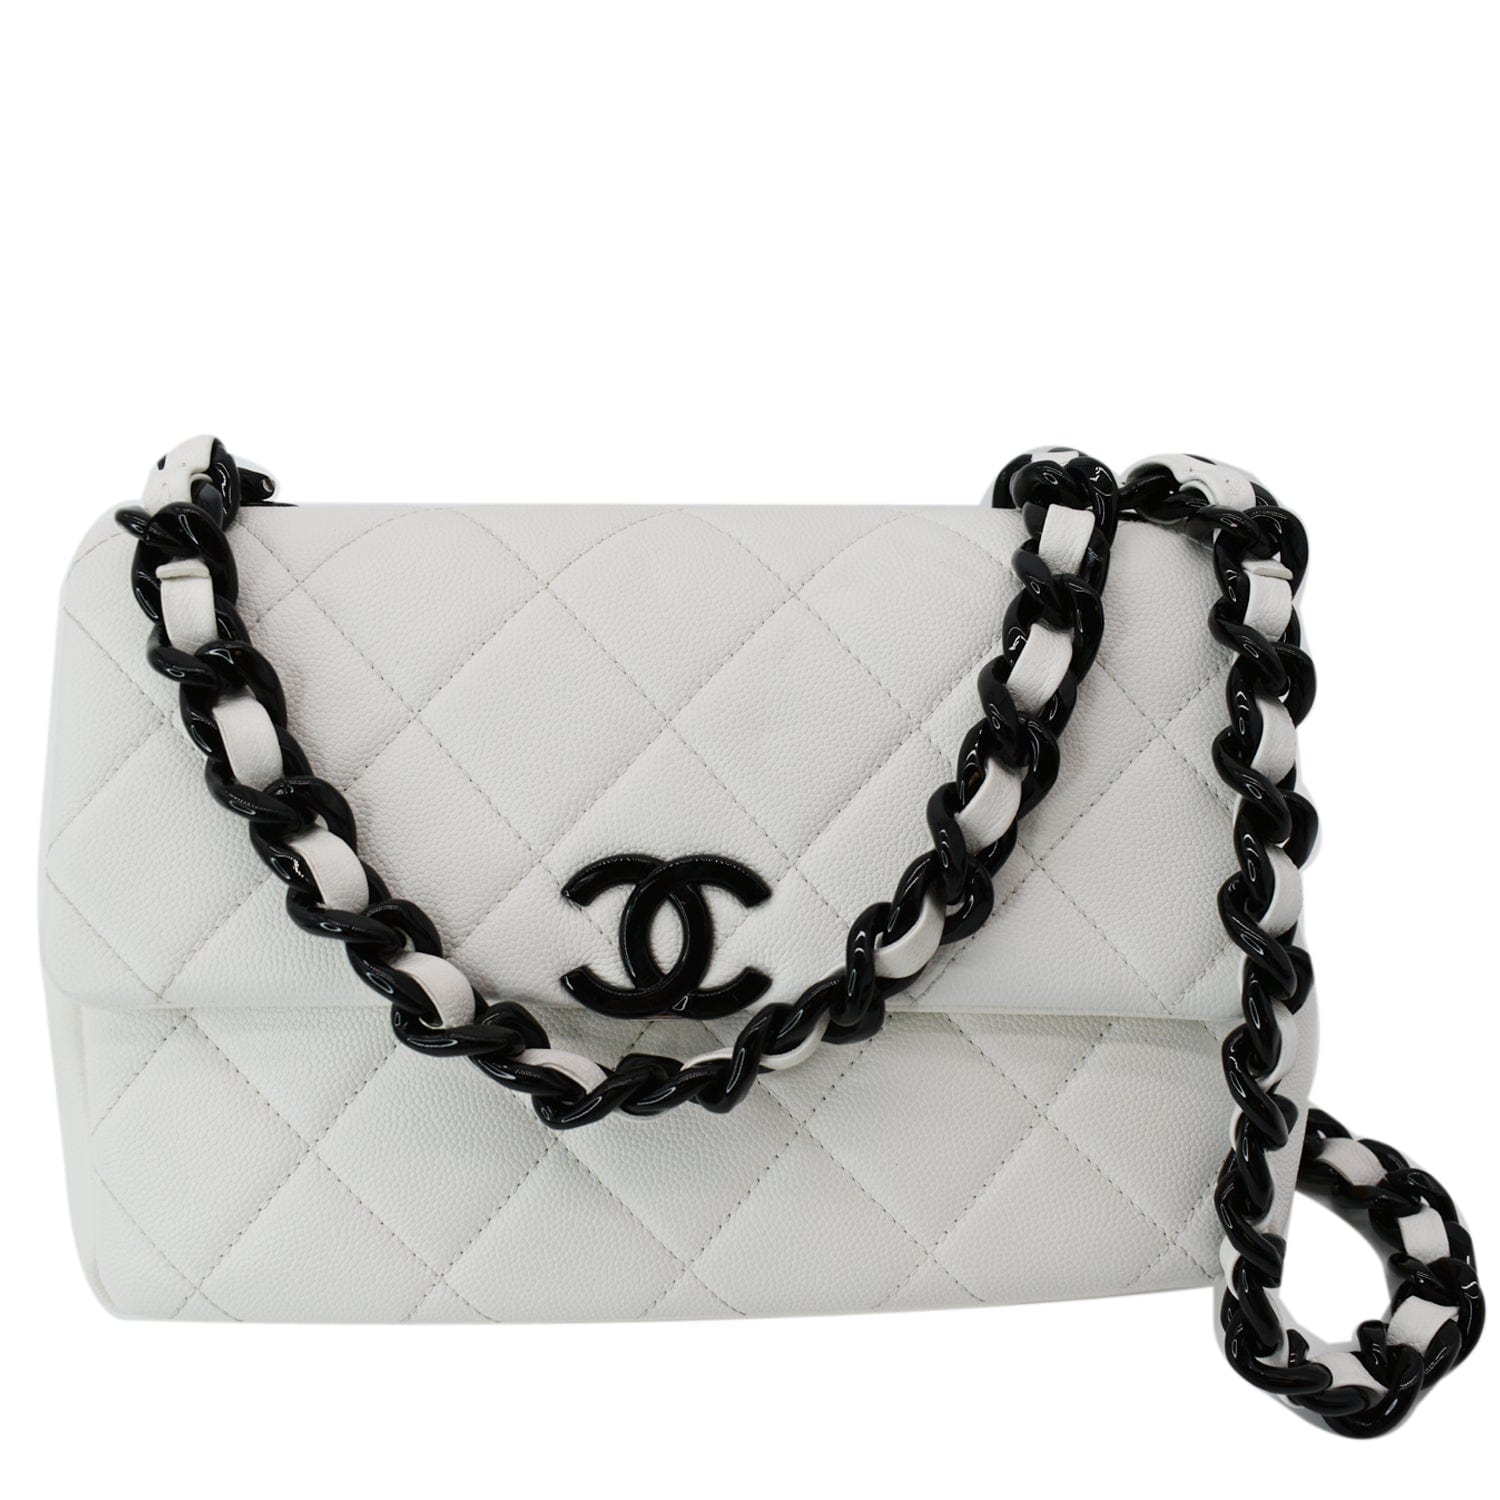 Why a Classic Chanel Flap Bag Is Worth the Money